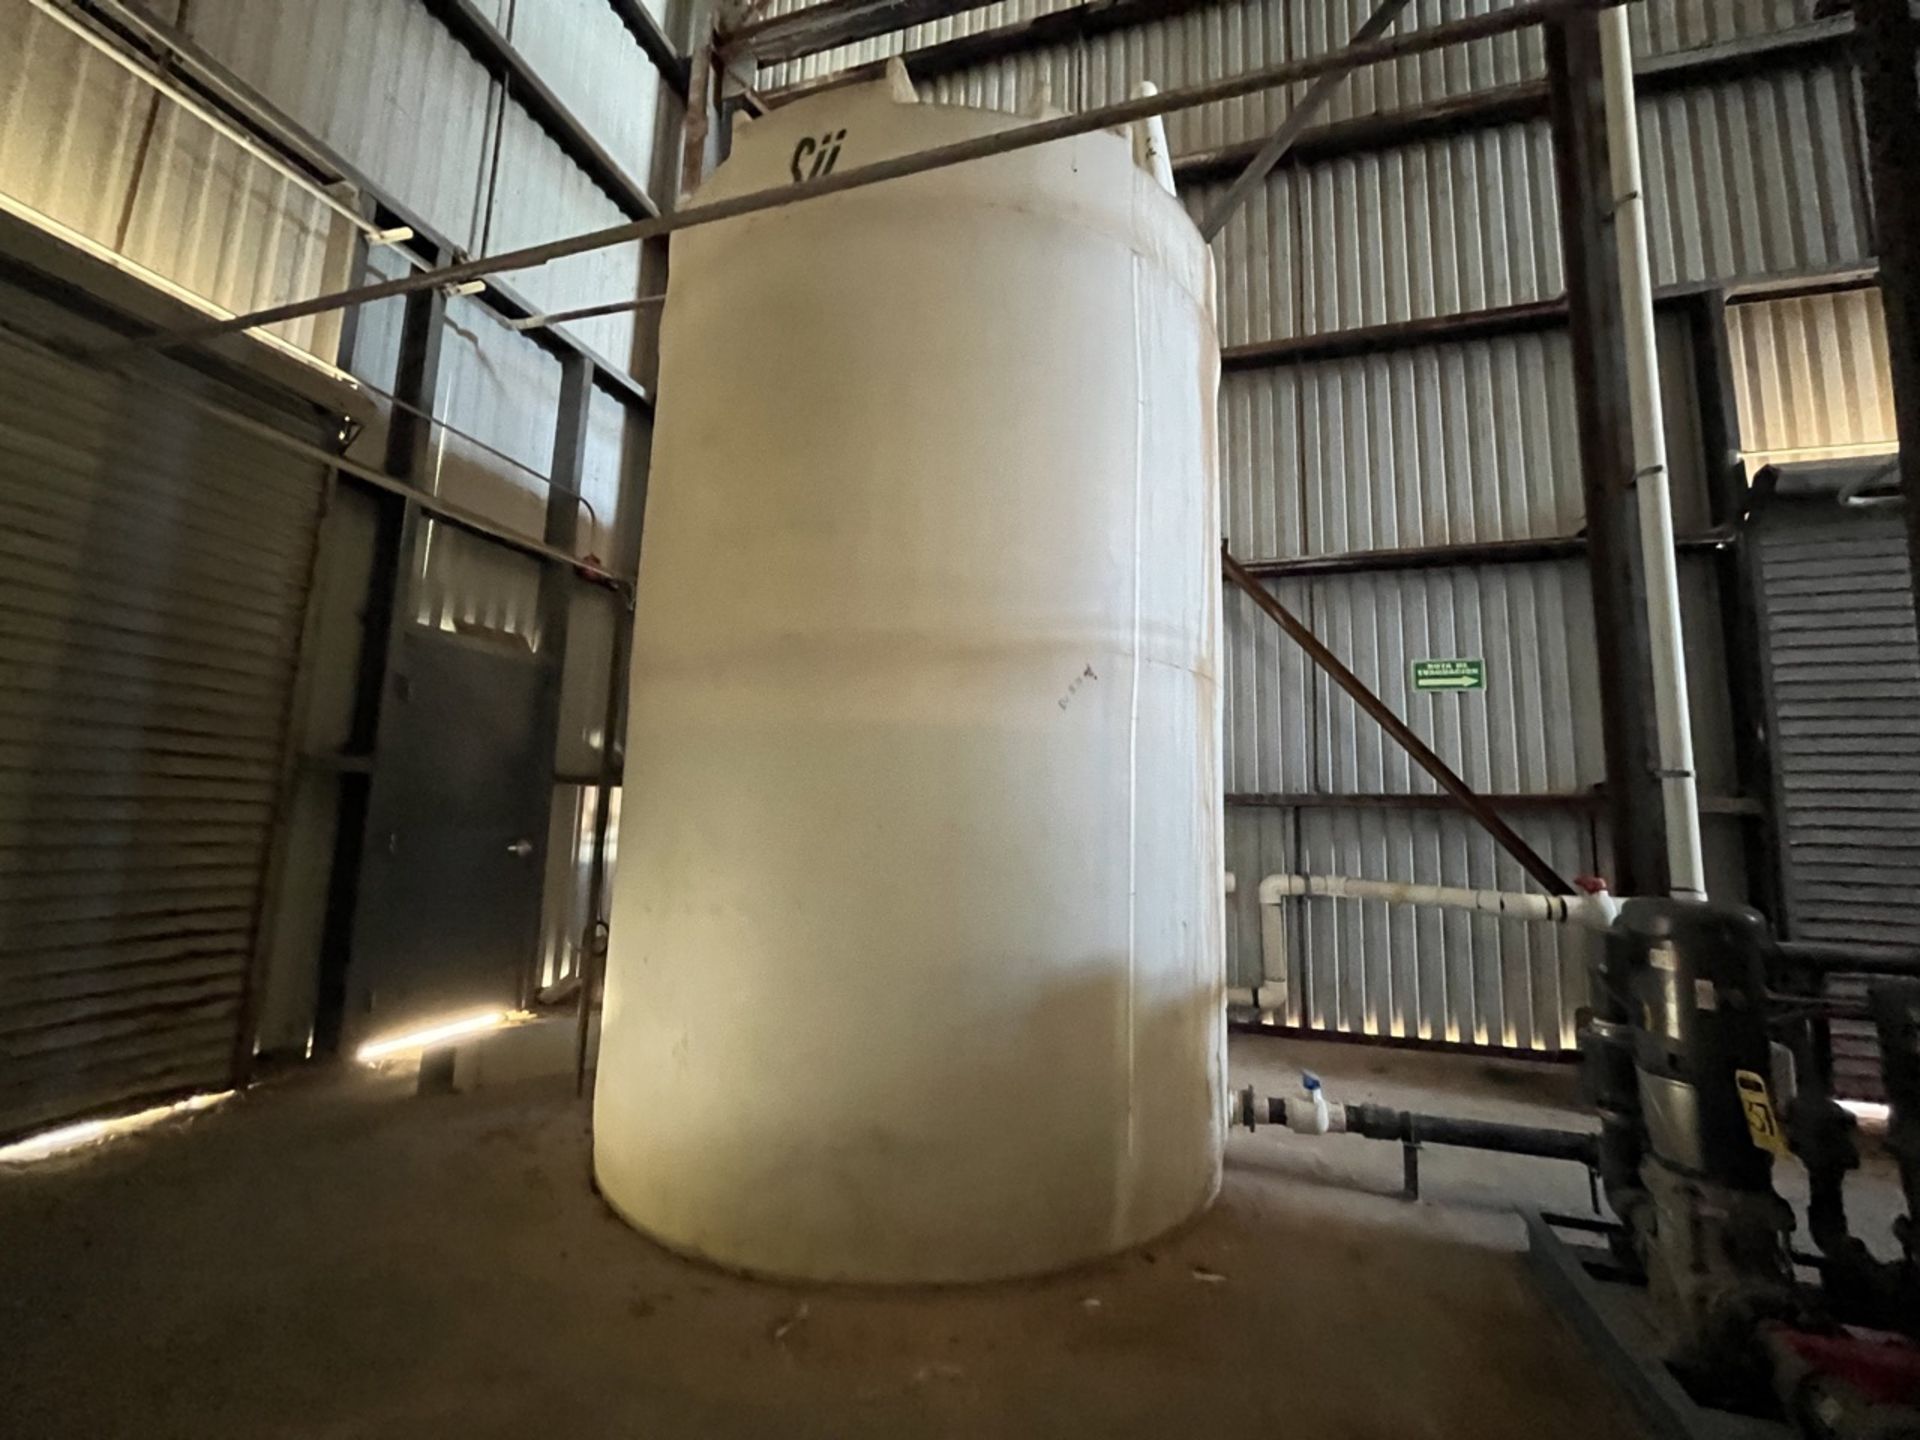 Plastic water storage tank with a capacity of 12 thousand liters, measures approx. 2.40 meters diam - Image 3 of 17